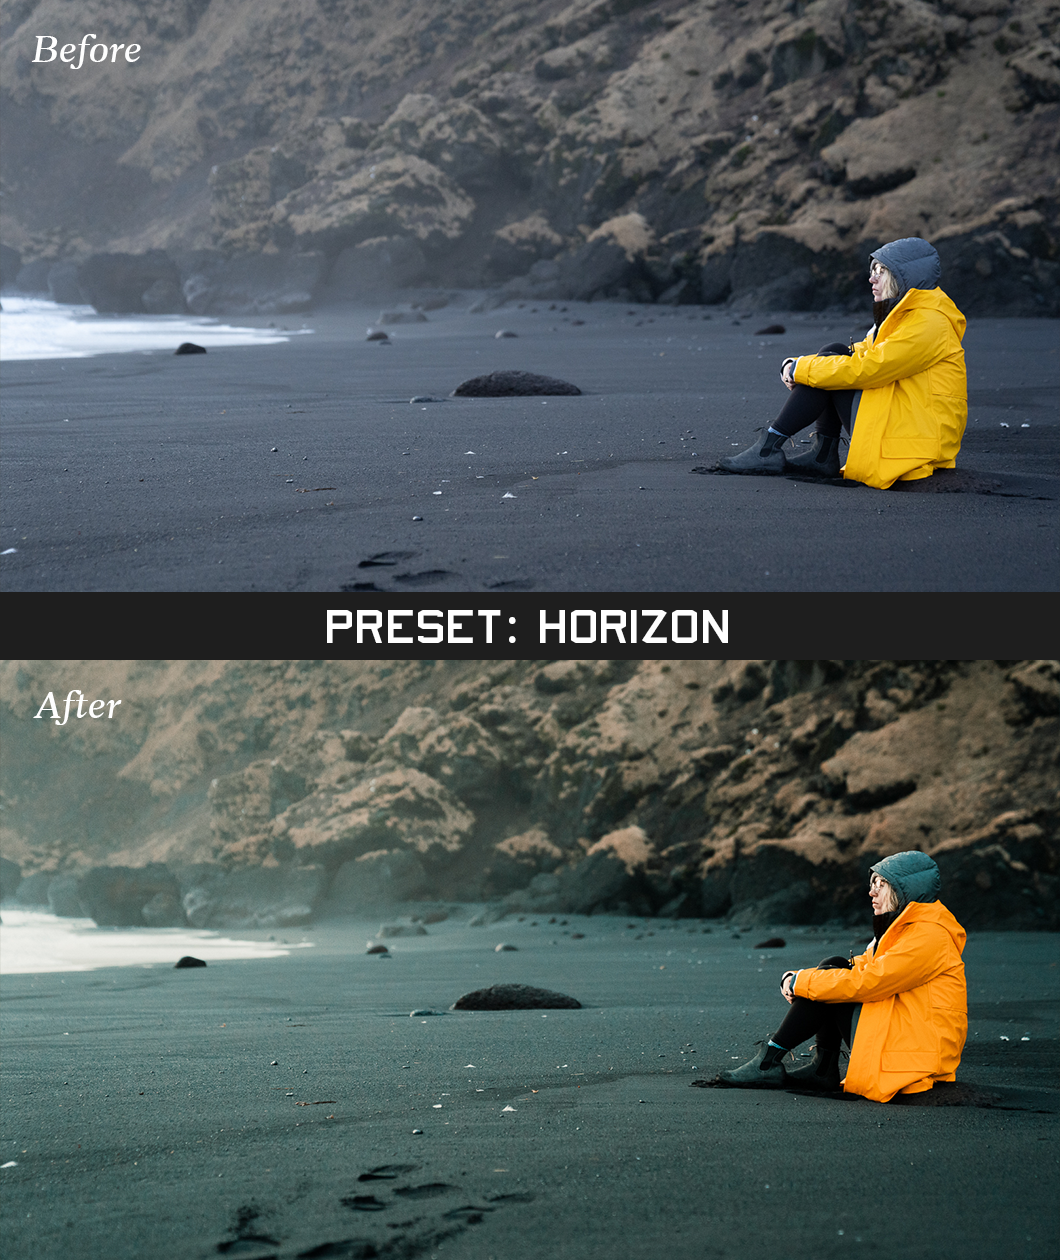 Two of the same photo of a person in a yellow coat on a black sand beach. In beween the photos is a grey bar that says "Preset: Horizon." The bottom photo is labeled "After" and the lighting is brighter and it is slightly zoomed out compared to the top photo - by Iz & Johnny Harris